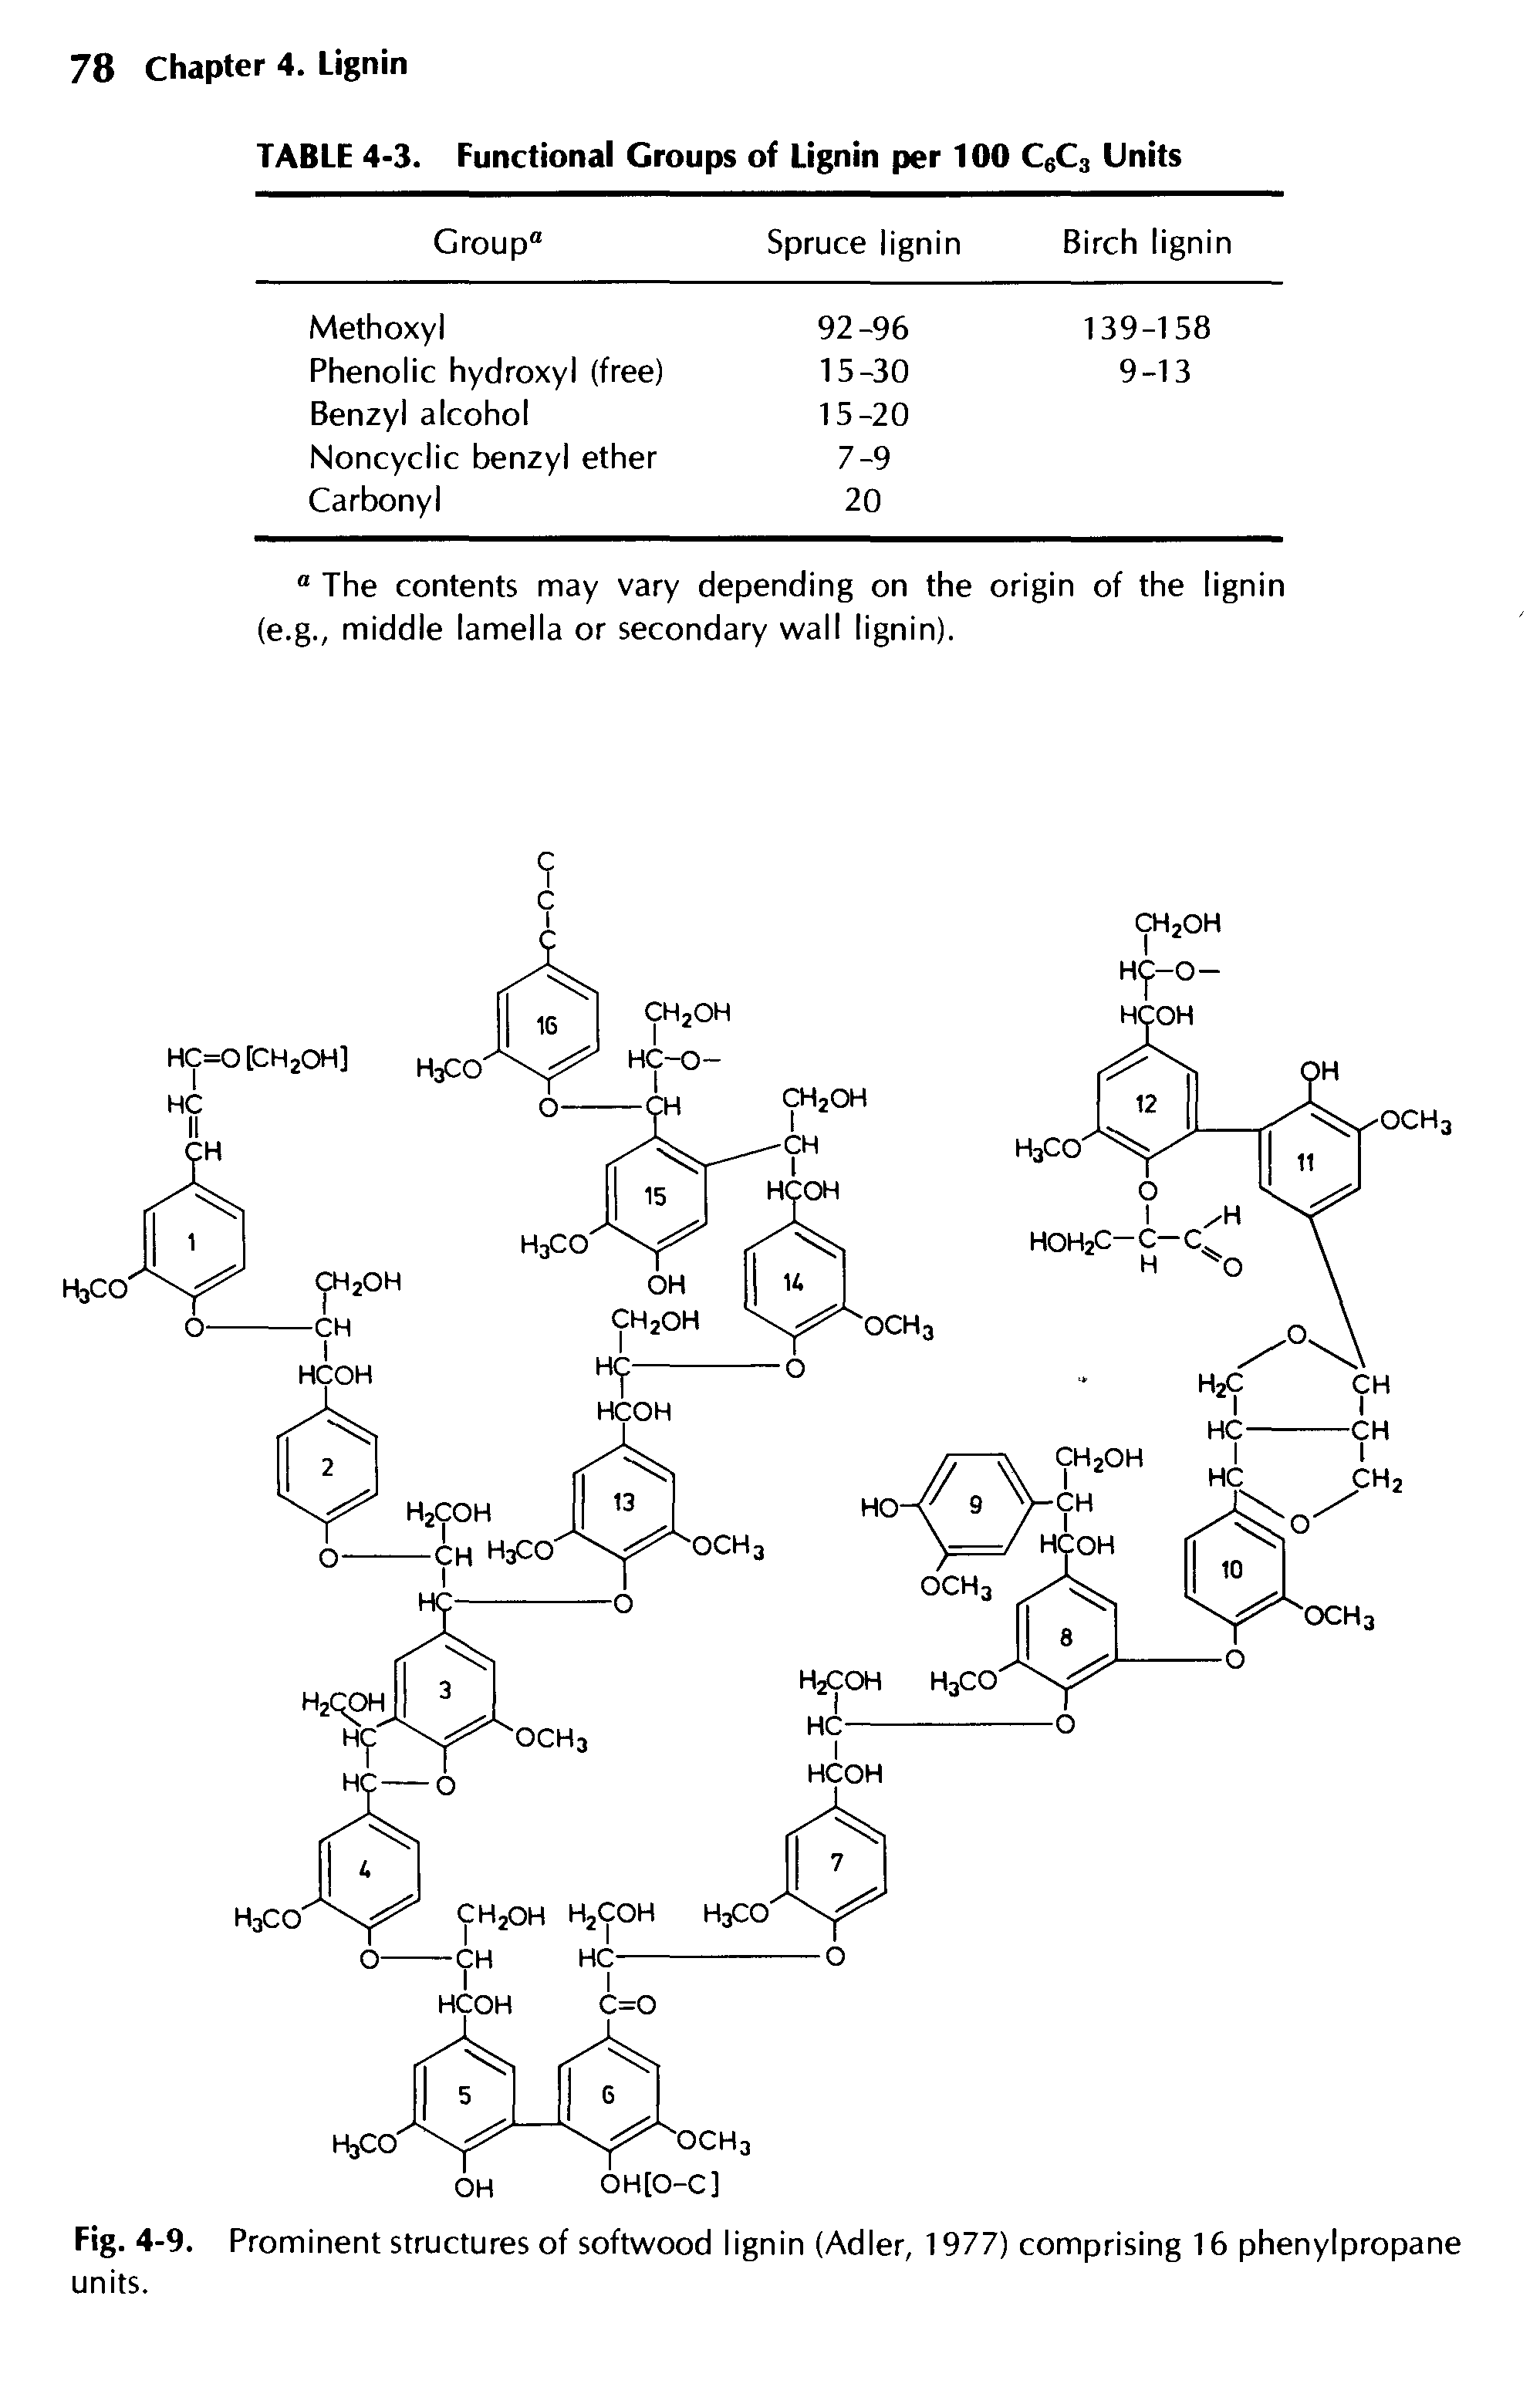 Fig. 4-9. Prominent structures of softwood lignin (Adler, 1977) comprising 16 phenylpropane units.